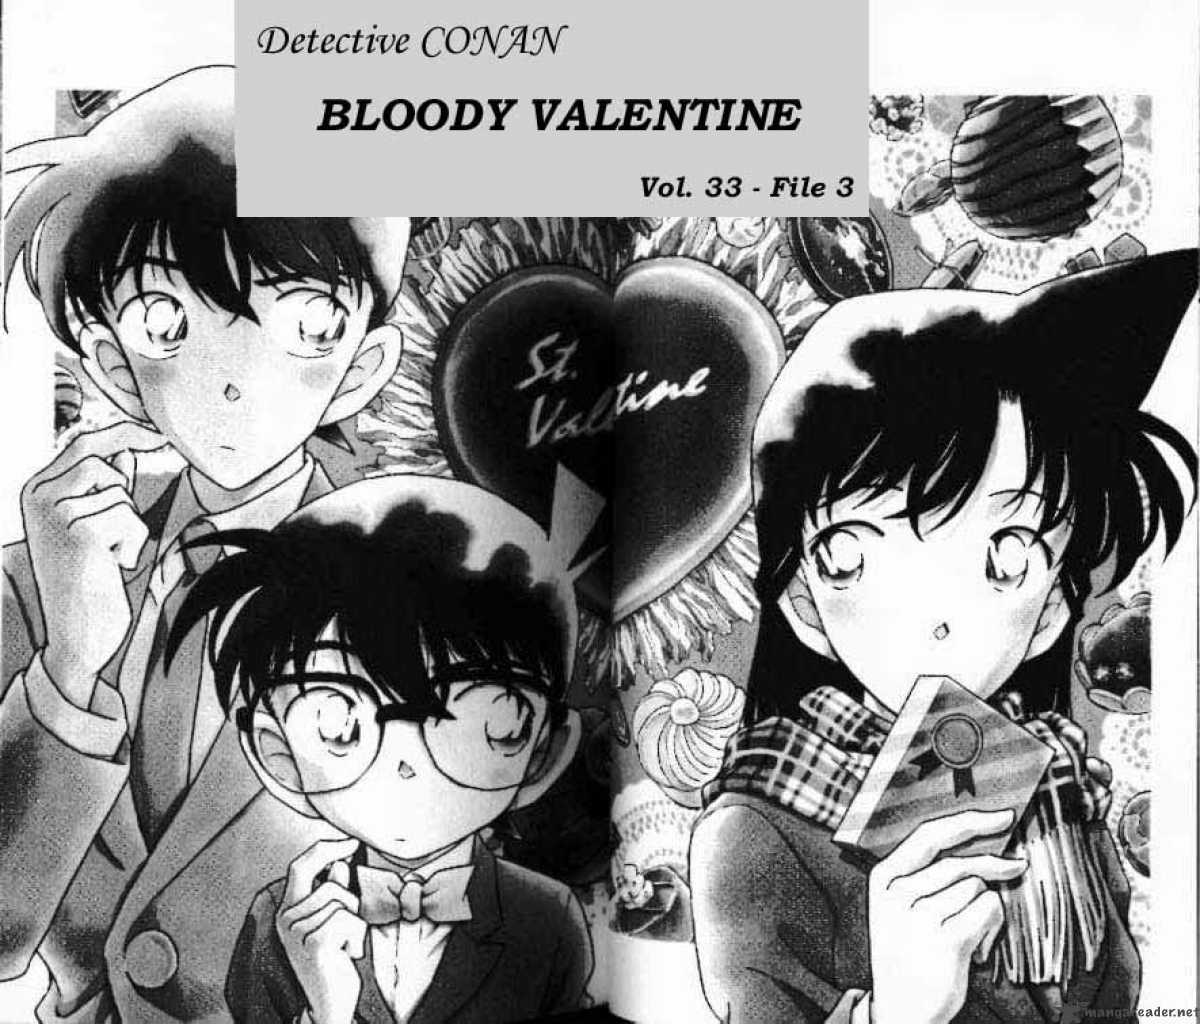 Read Detective Conan Chapter 331 Bloody Valentine - Page 2 For Free In The Highest Quality